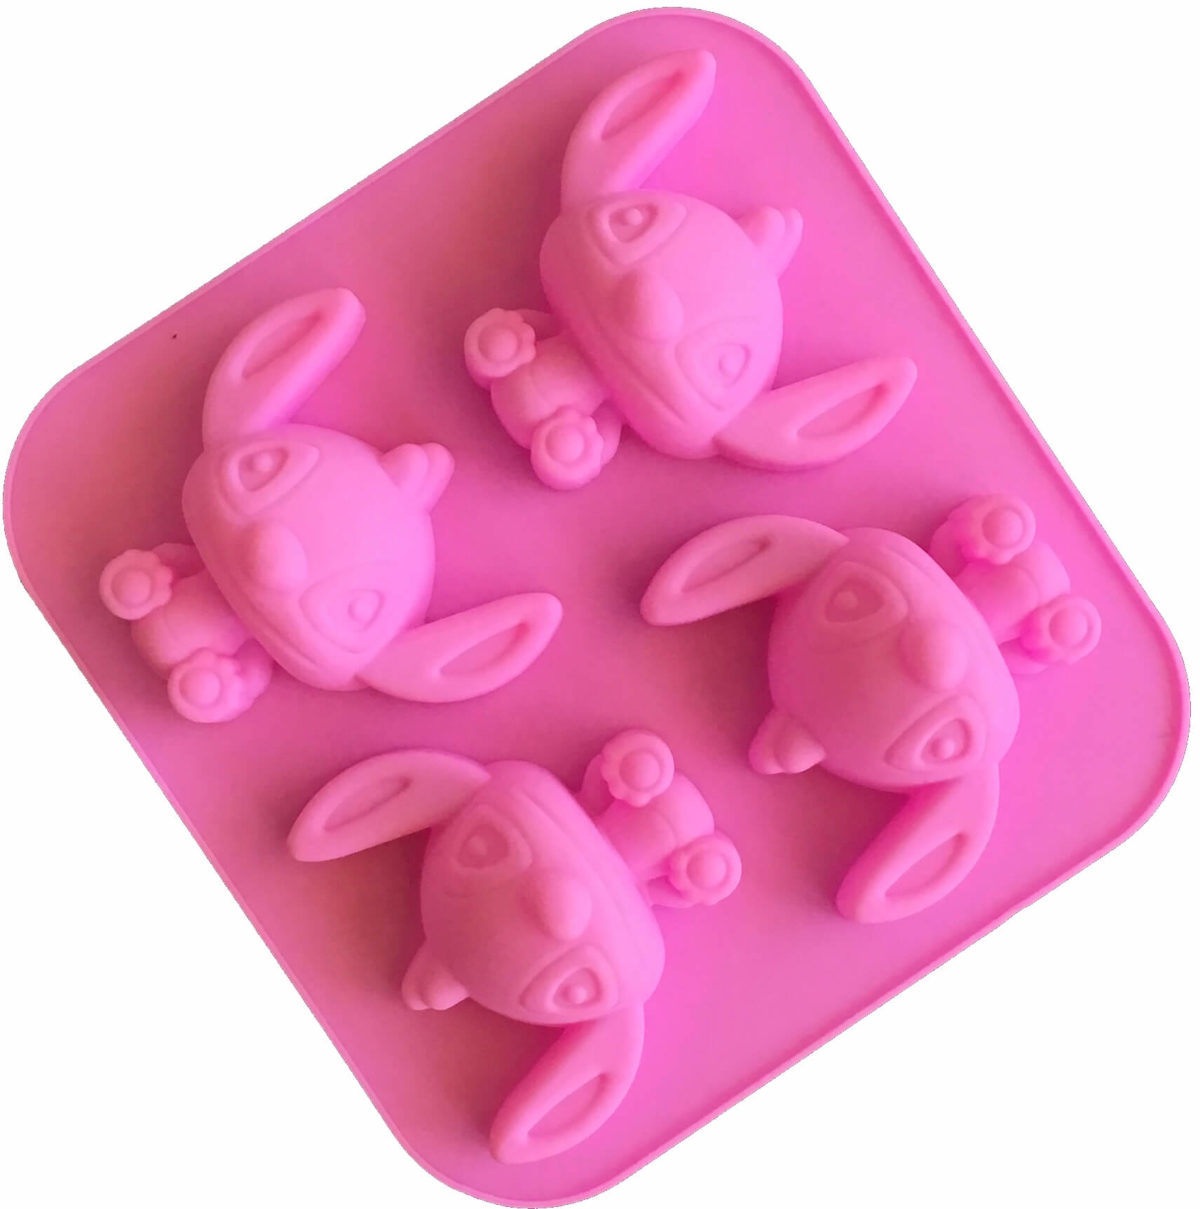 pink four cavity silicone mould with identical alien stich cavites